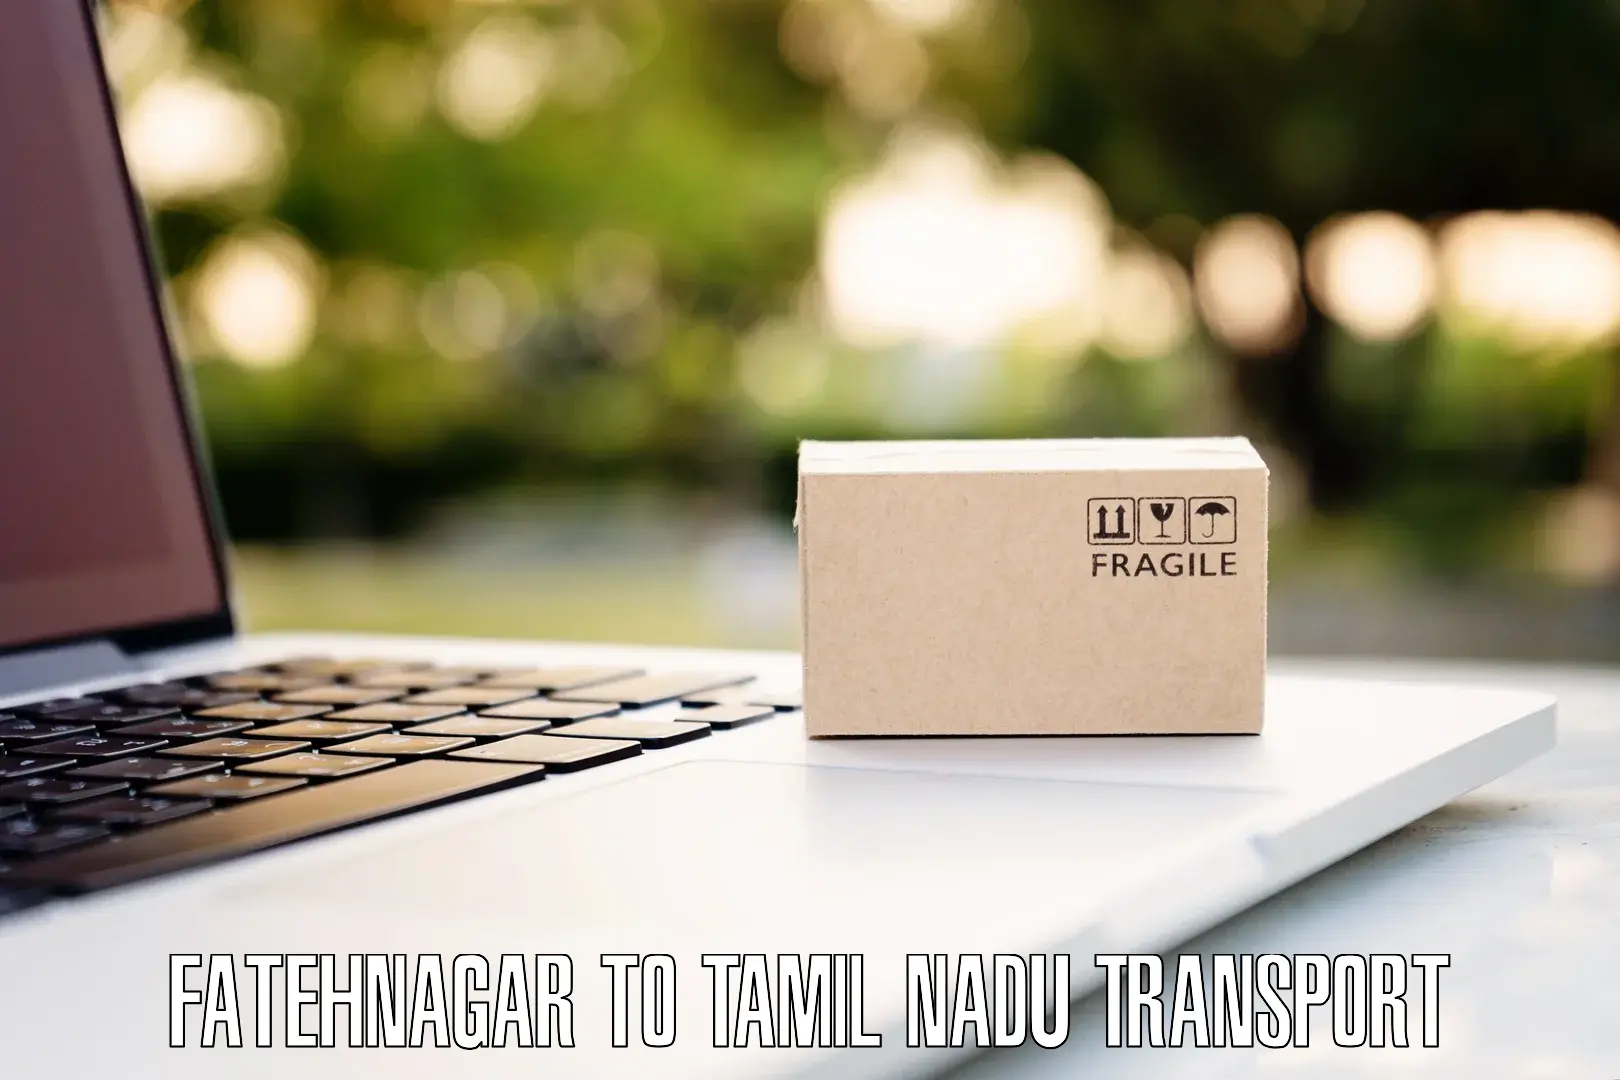 Air freight transport services Fatehnagar to Sri Ramachandra Institute of Higher Education and Research Chennai